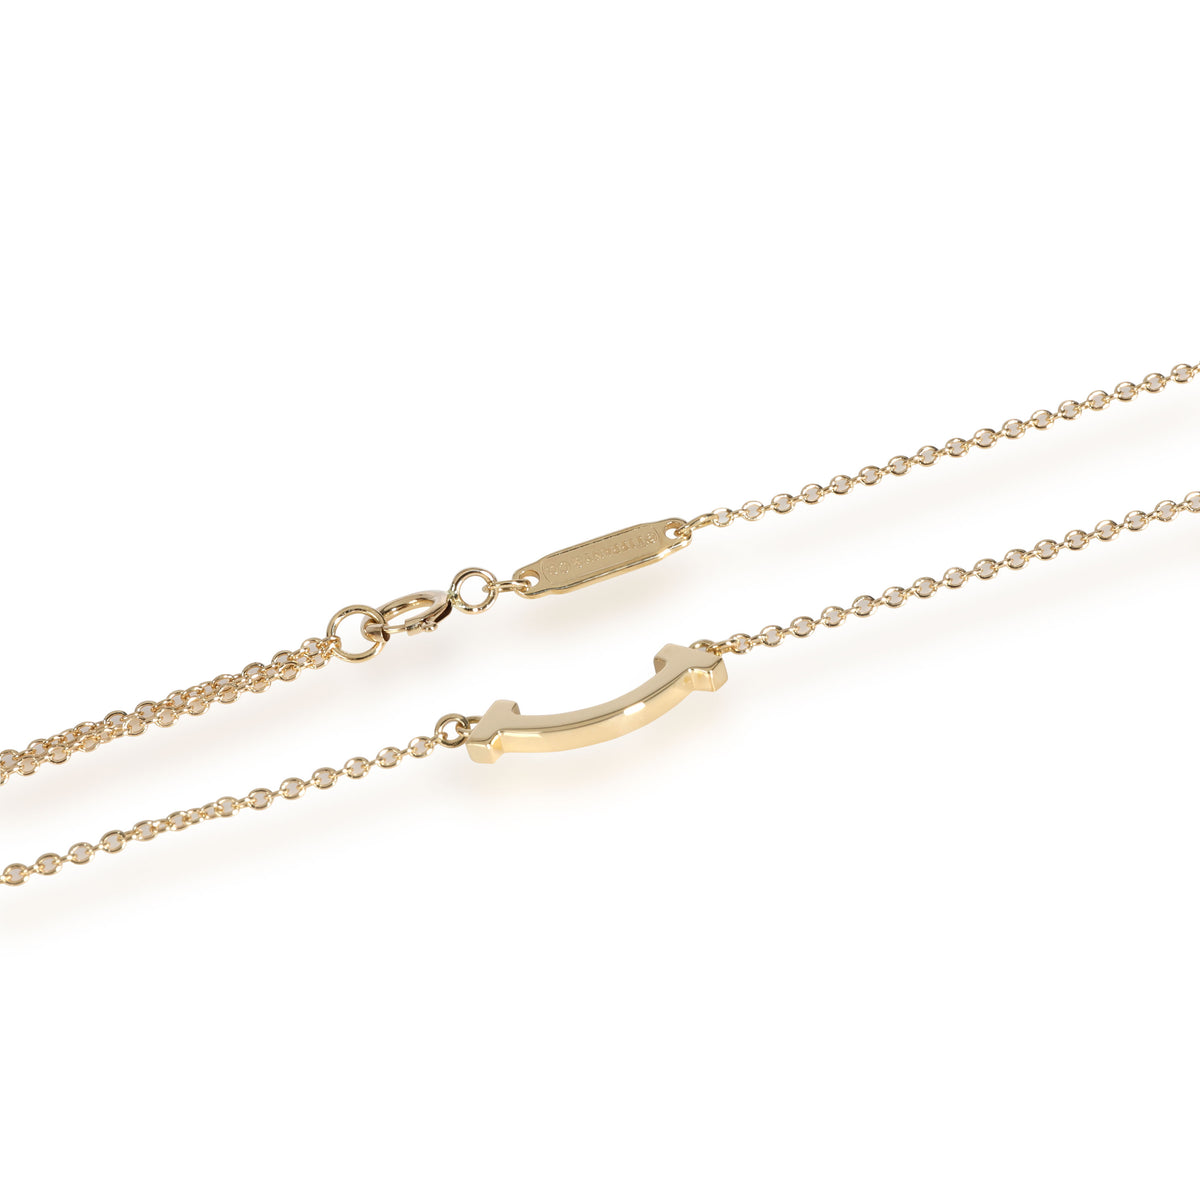 Tiffany & Co. T Smile Necklace in 18K Yellow Gold